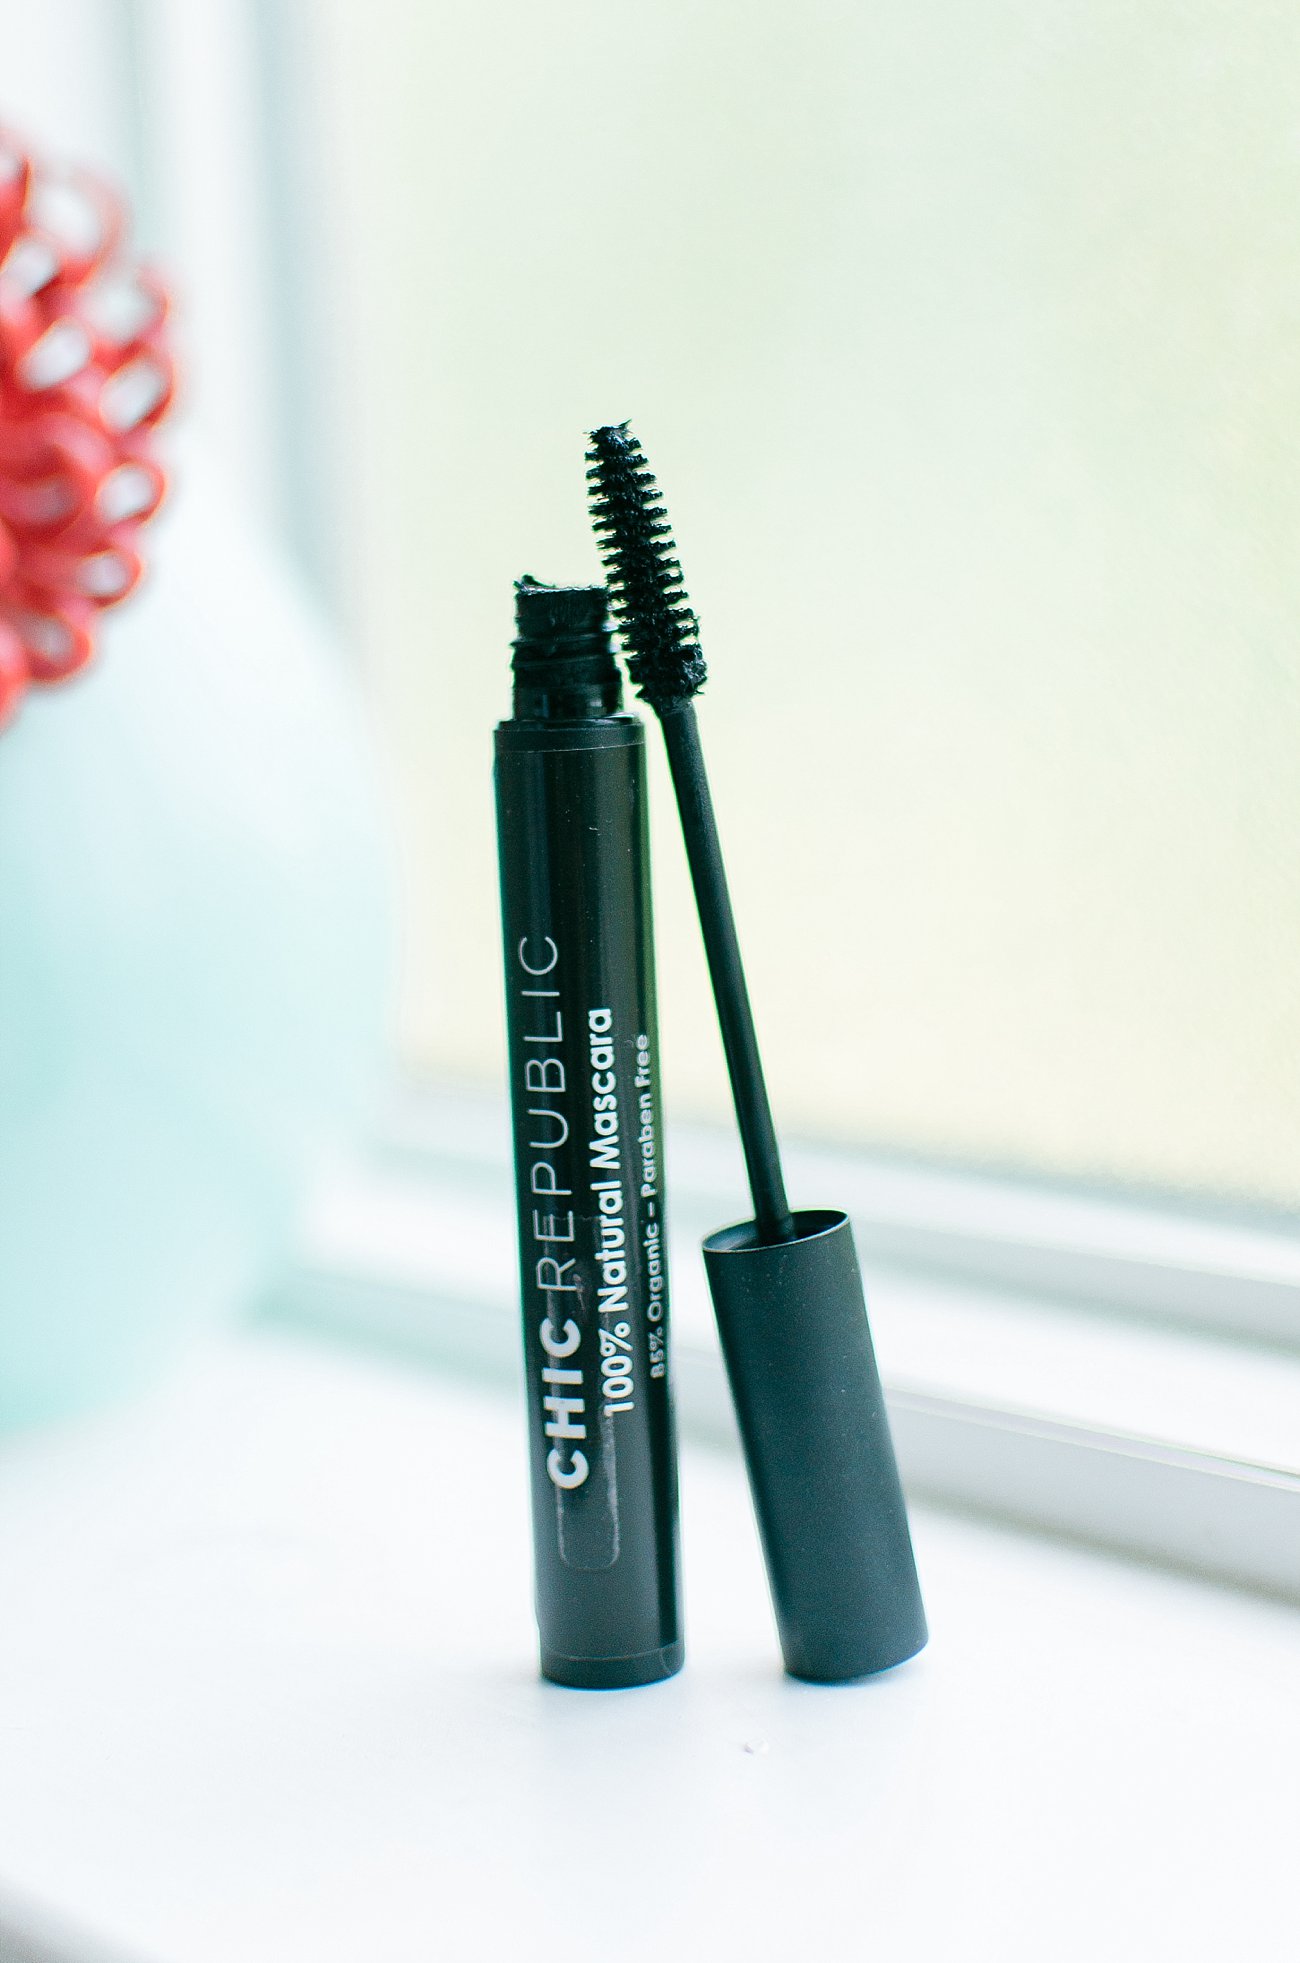 The Best Natural and Organic Mascaras Put to the Test - Review, Swatches, and Are They Worth It? (5)